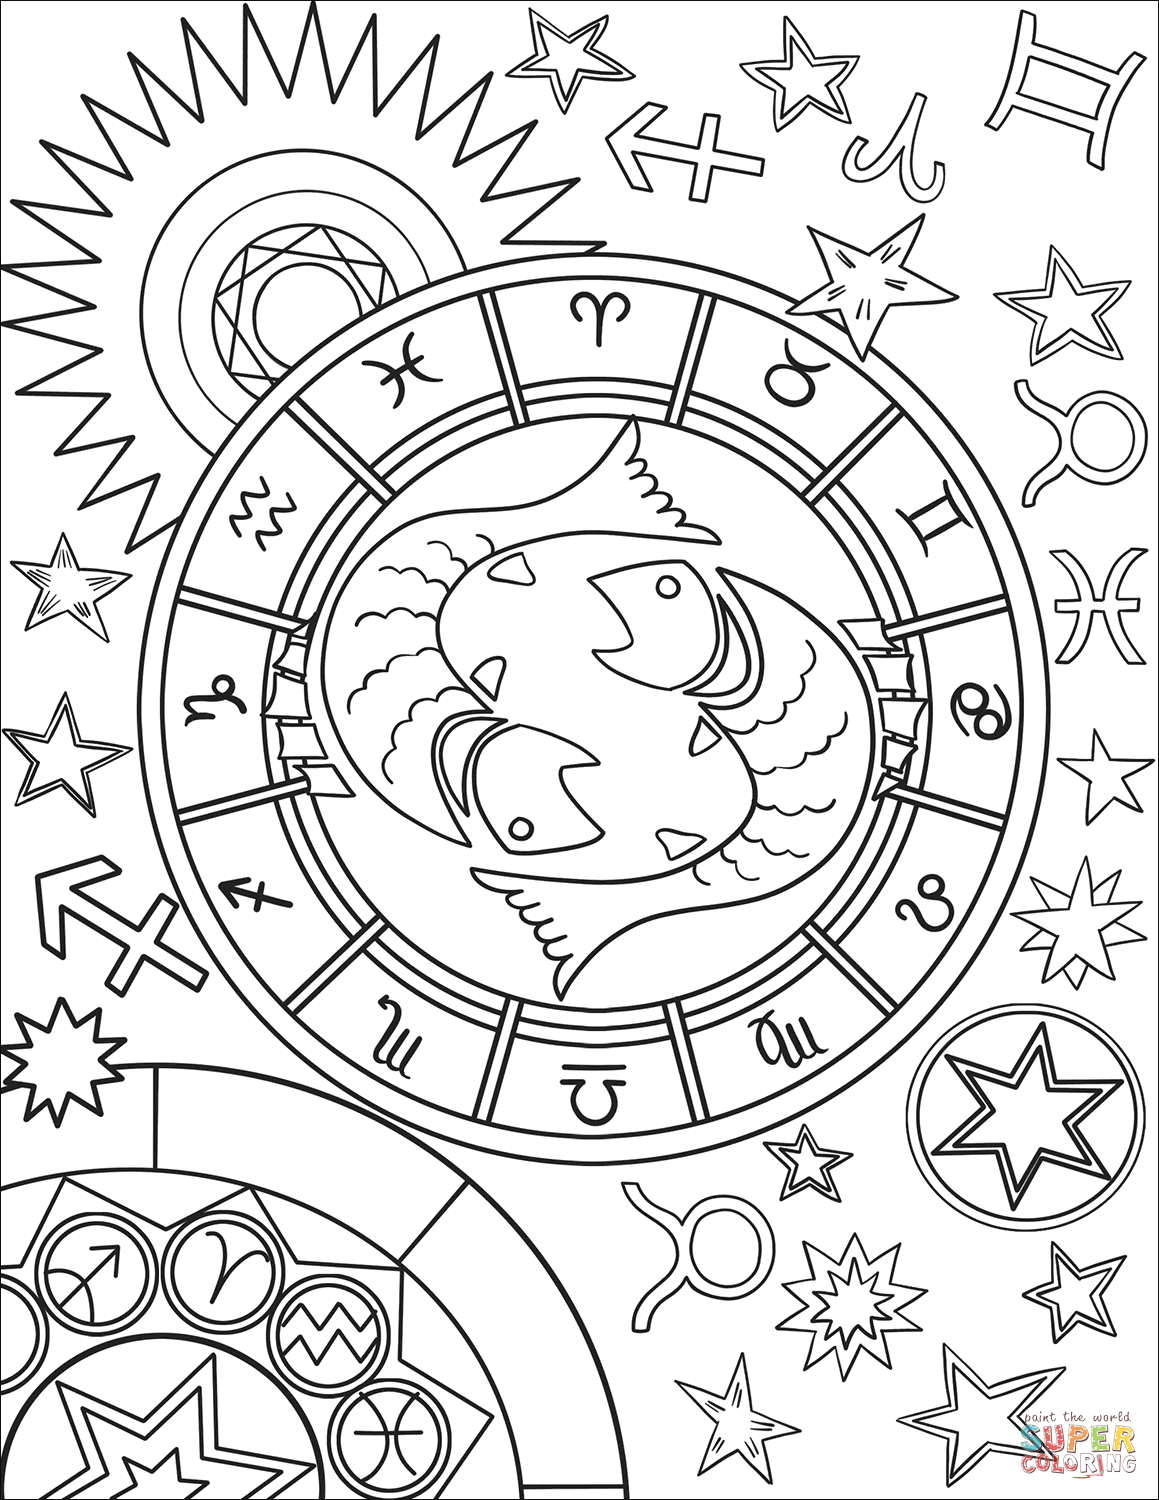 Zodiac Worksheets For Adults | Printable Worksheets and Activities for  Teachers, Parents, Tutors and Homeschool Families